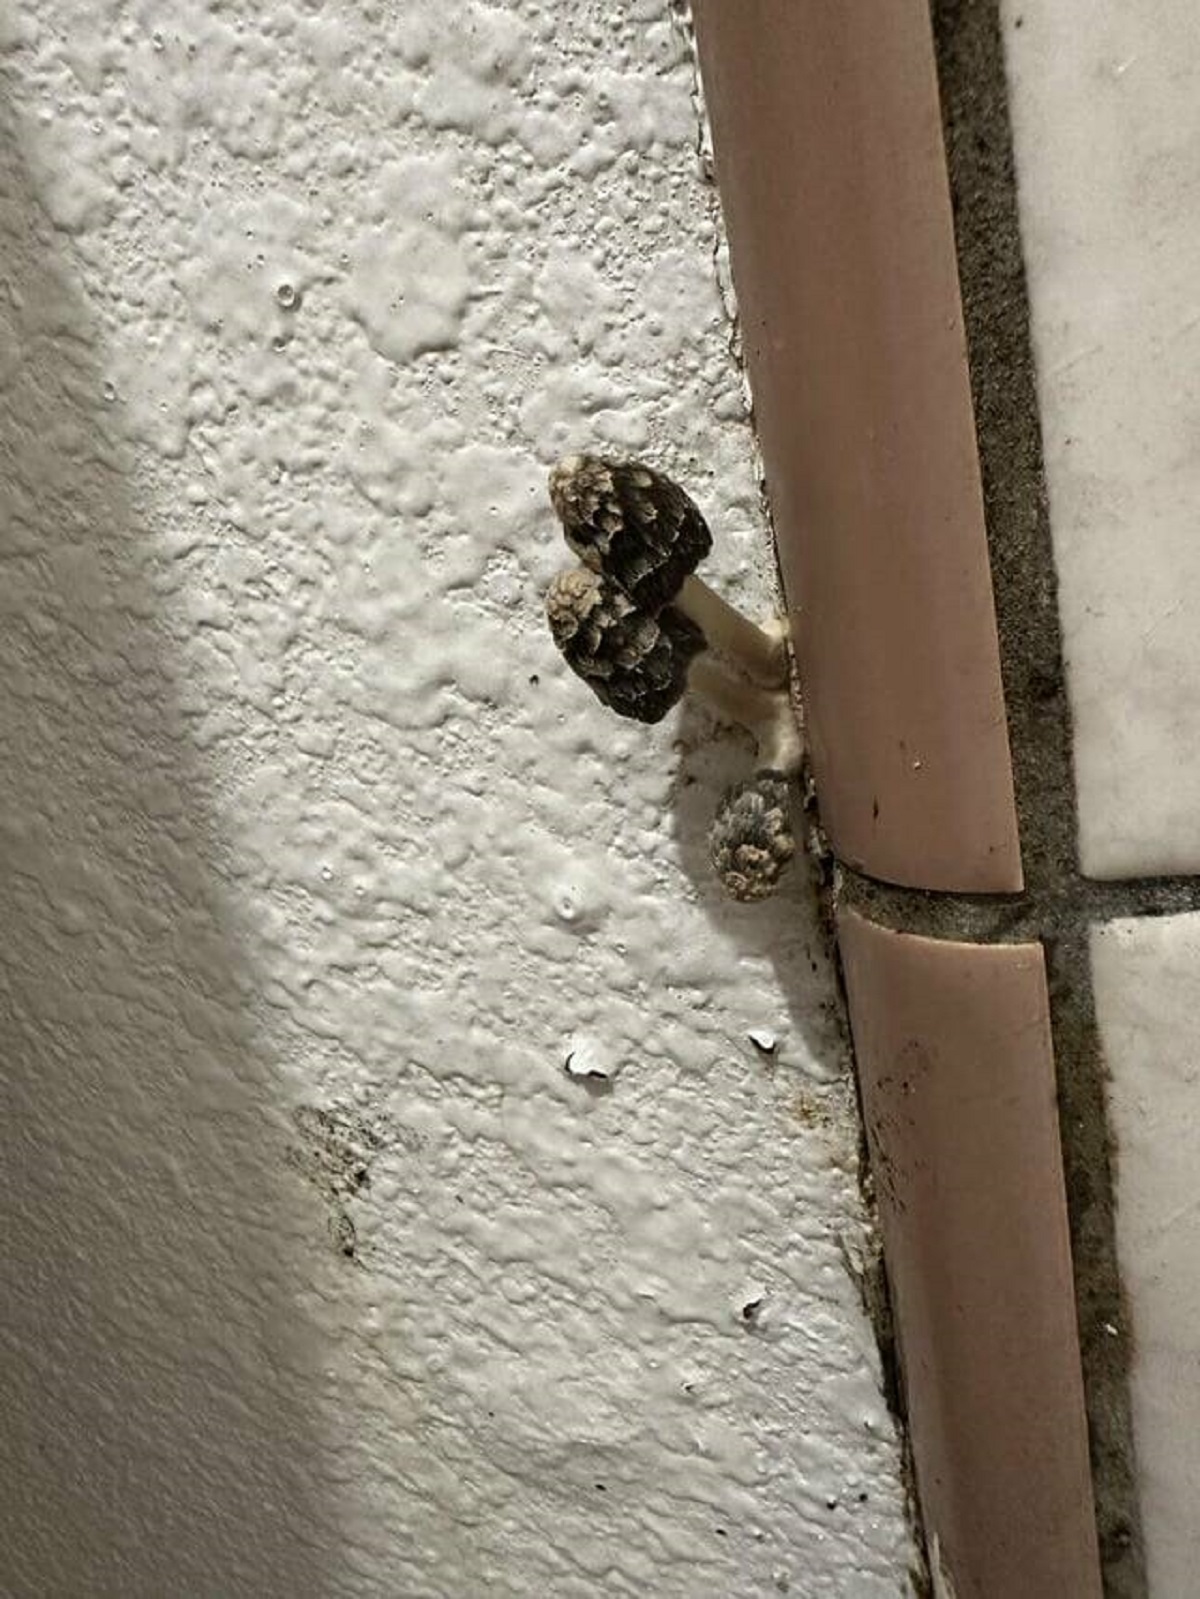 "Mushrooms growing in shower of our 5 star rated Airbnb"